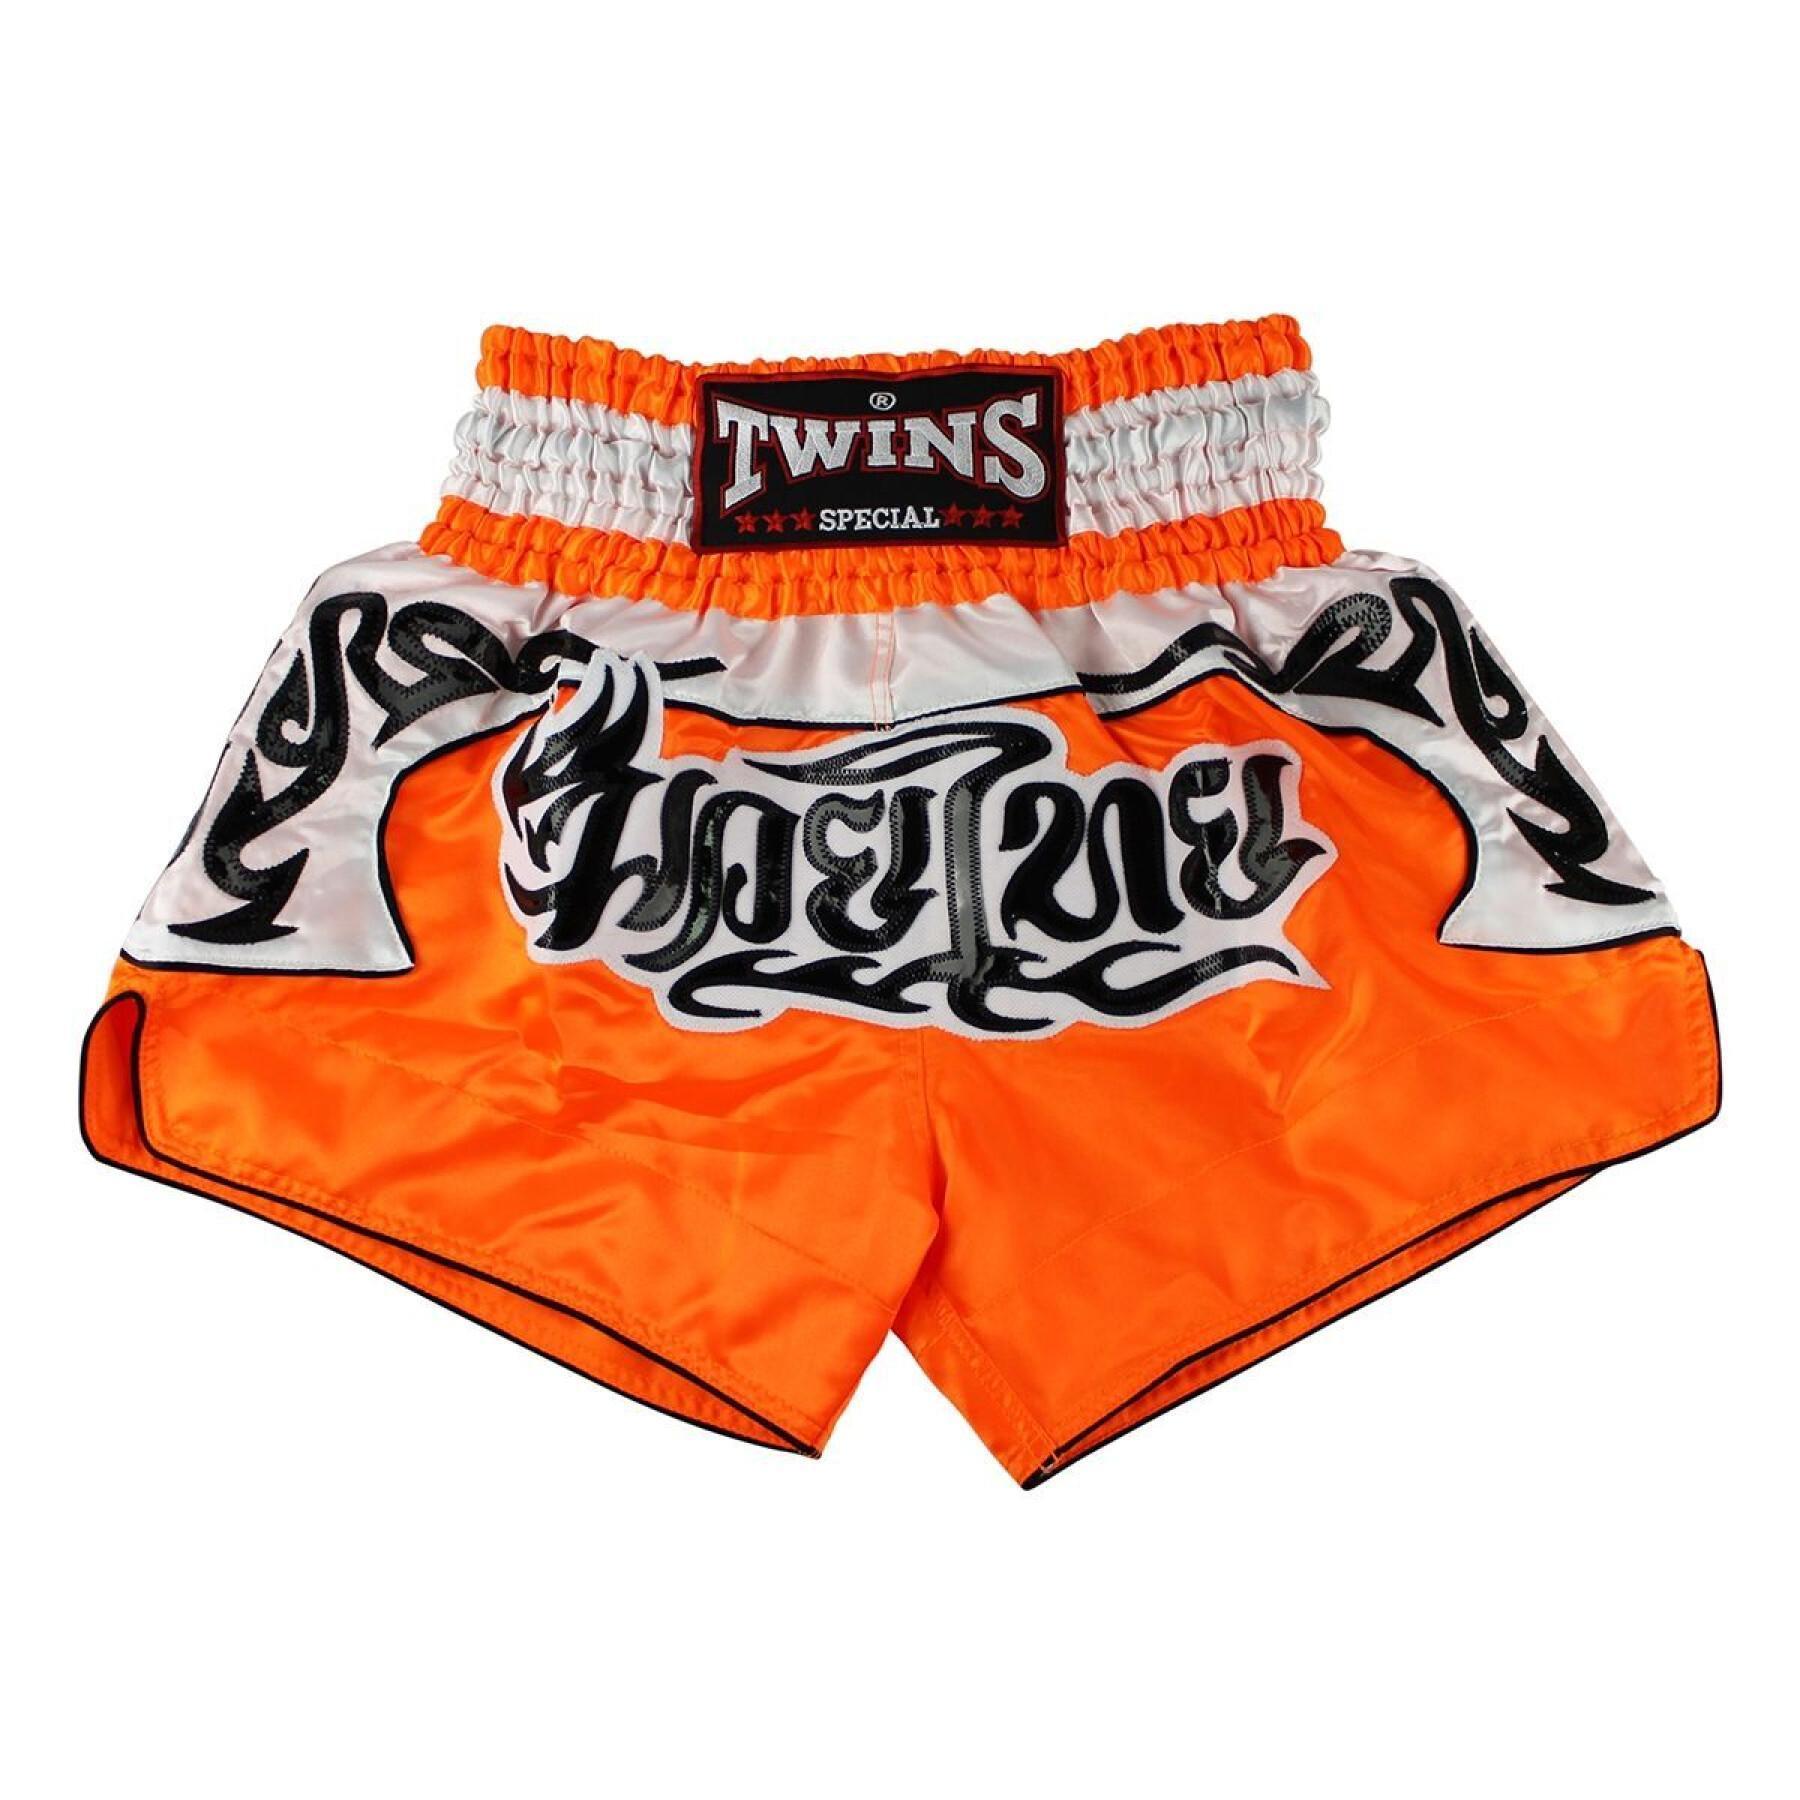 Thai-Boxing Shorts Booster Fight Gear